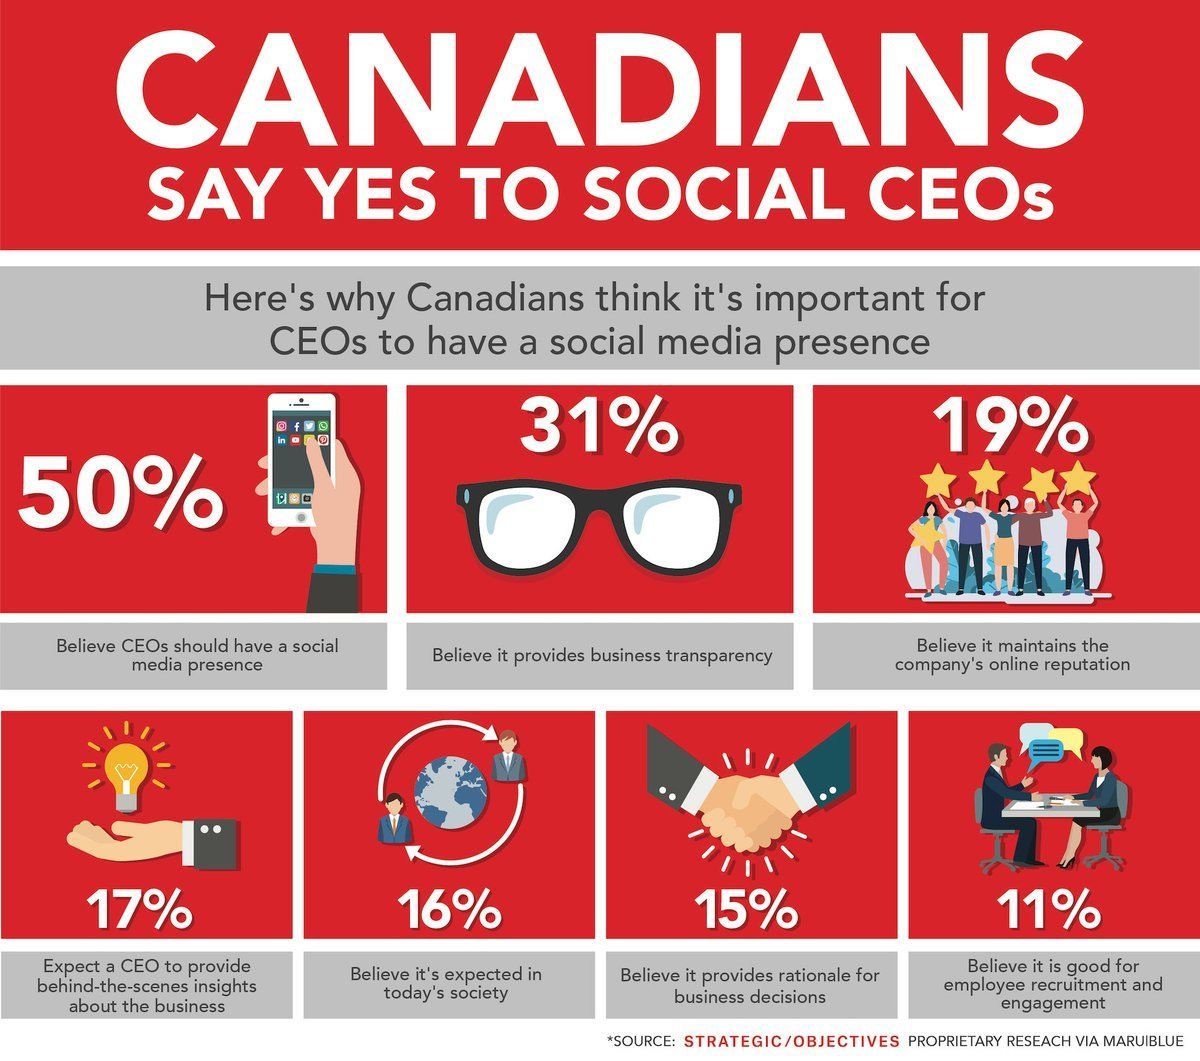 Should your CEO get social? Research from @SO_pr says 31% of Canadians believe a #SOcialceo brings business transparency and builds cred. Here’s our own #SOcialceo @debweinstein with more good reasons why and how CEOs should engage #pr #ceo #leadership   buff.ly/2MEwFgF